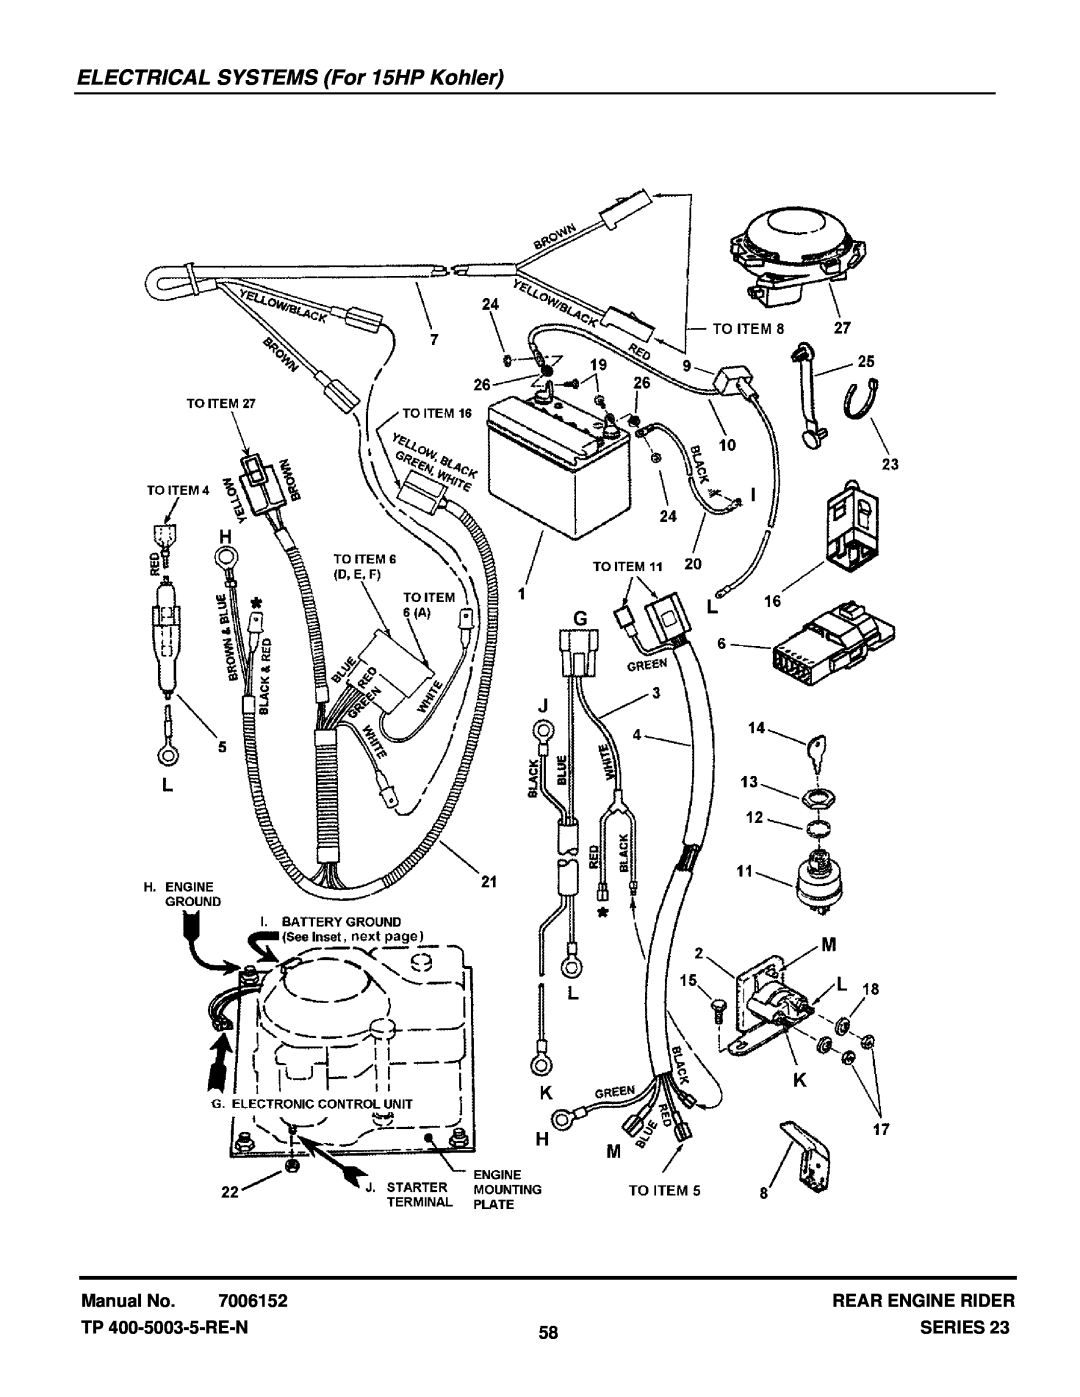 Snapper 281023BVE ELECTRICAL SYSTEMS For 15HP Kohler, Manual No, 7006152, Rear Engine Rider, TP 400-5003-5-RE-N, Series 